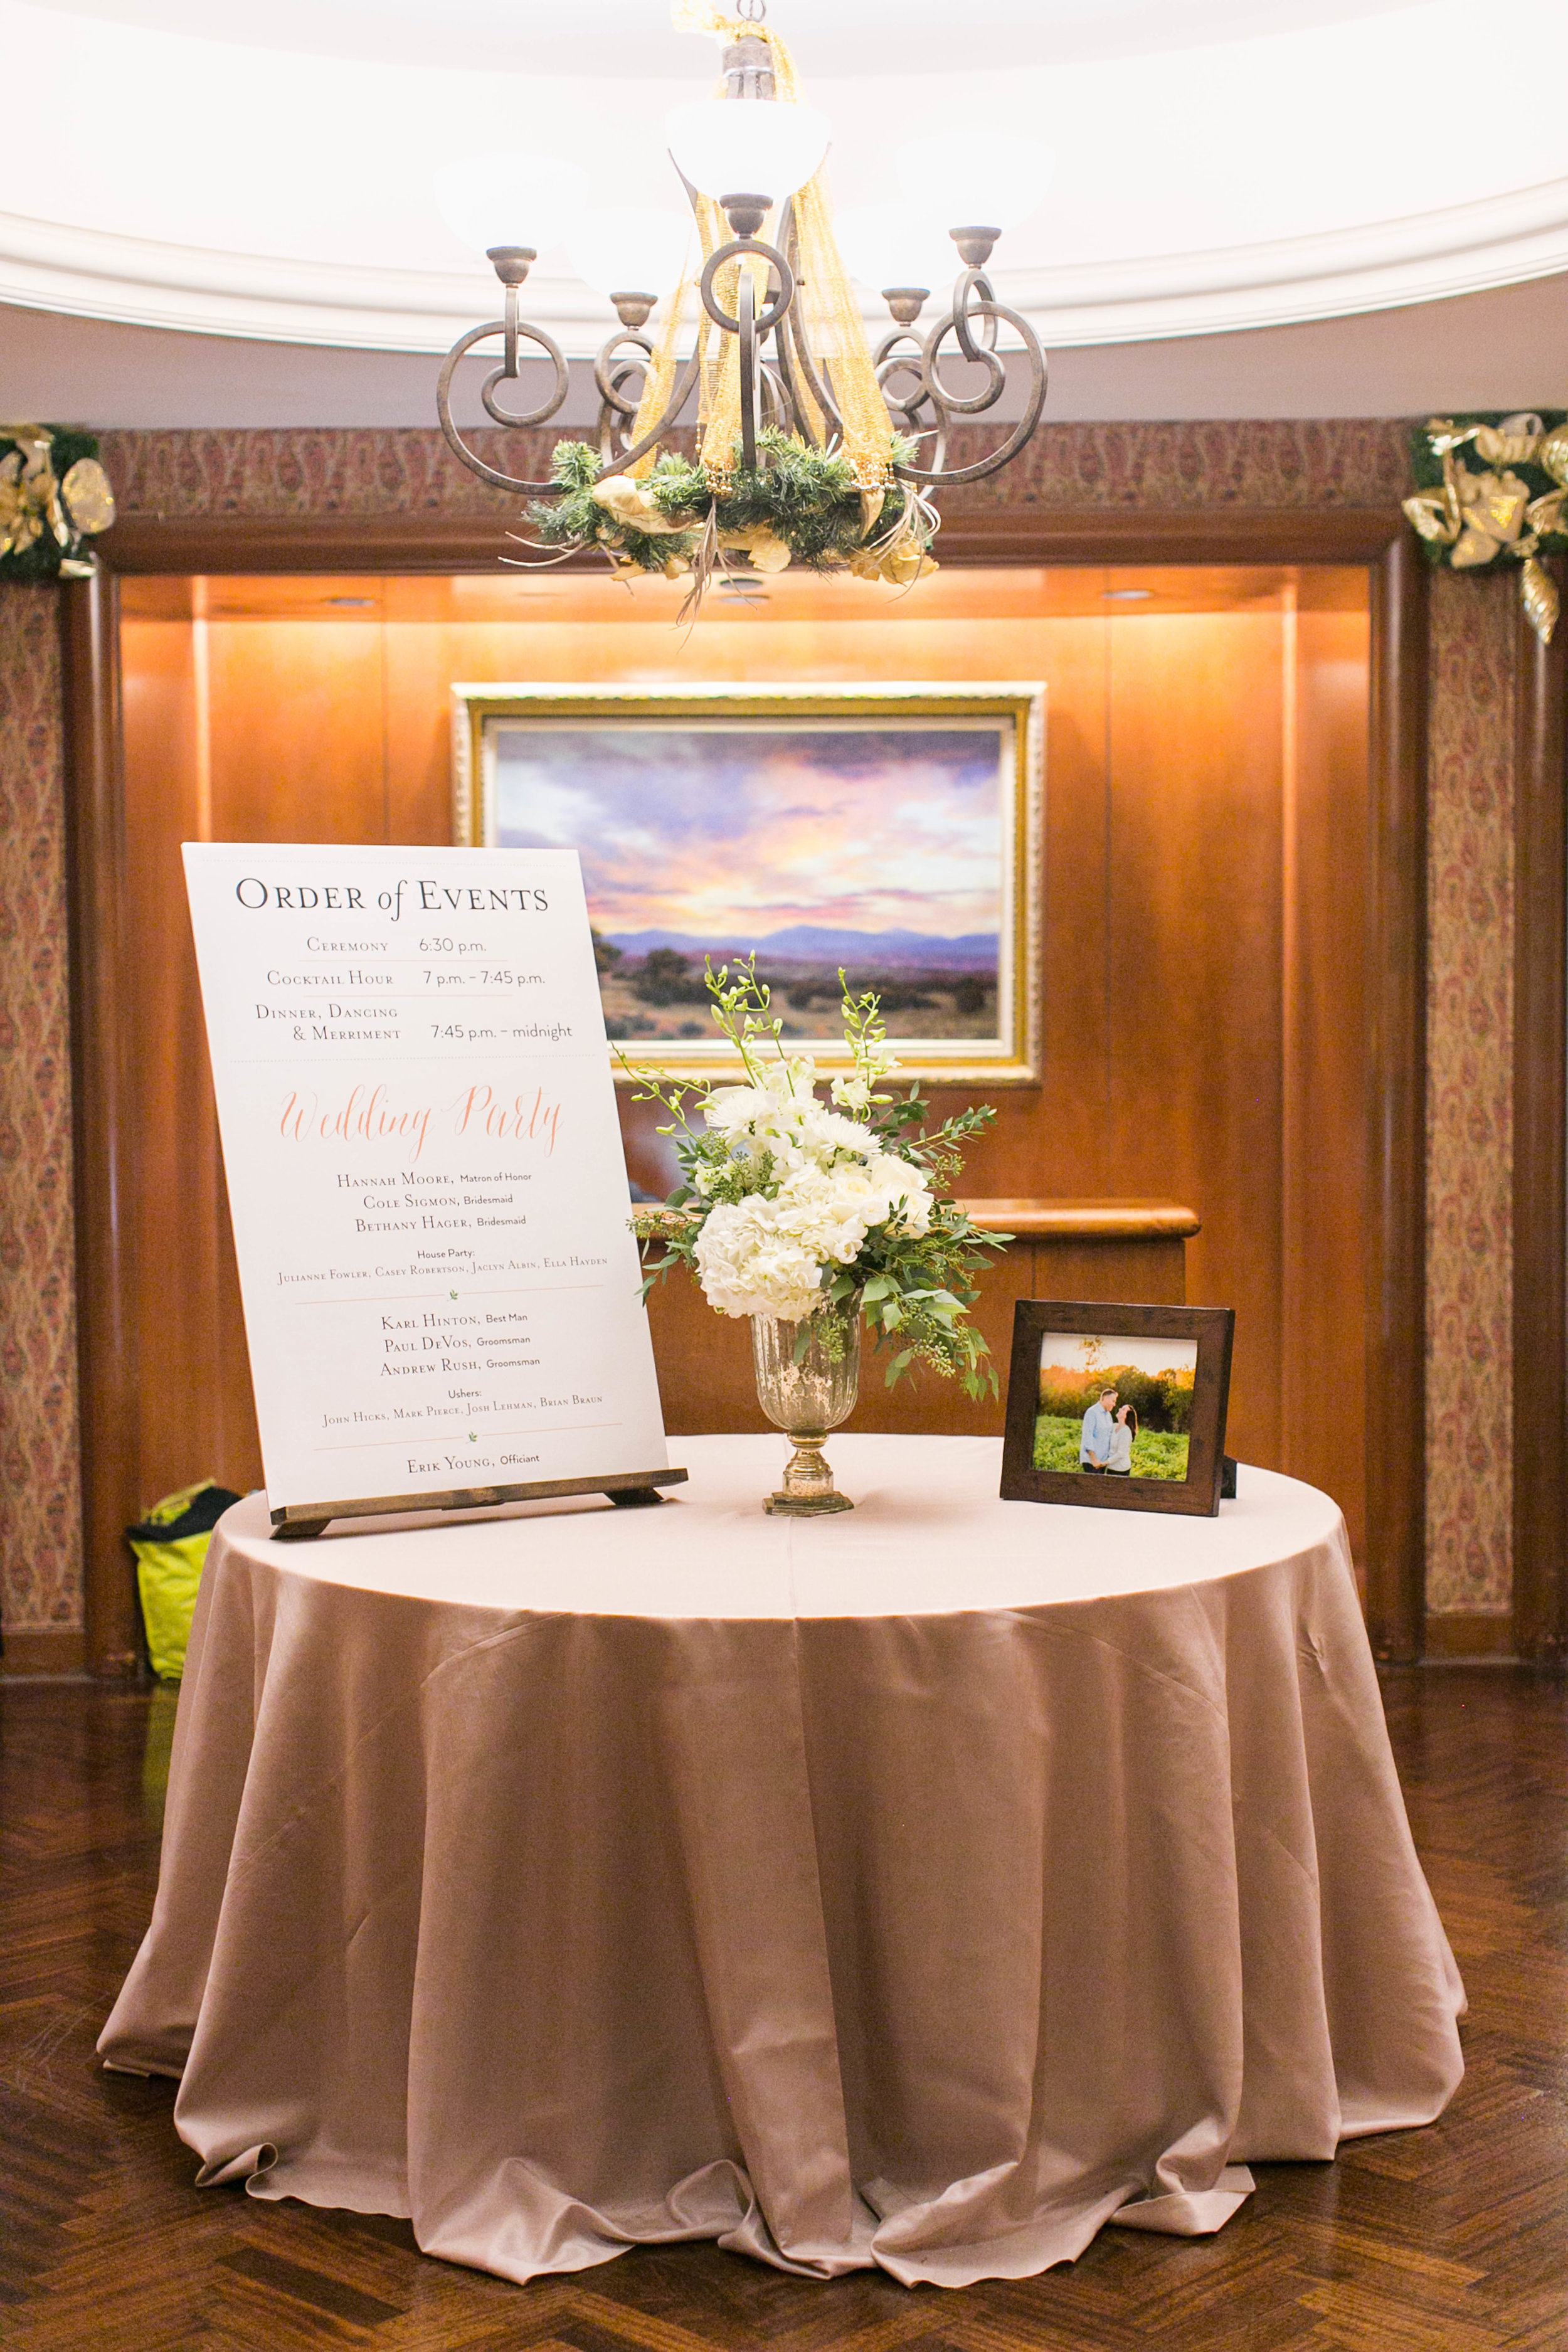  When people walked into the hall for the ceremony, they were greeted by this table with a poster-sized Order of Events, some flowers and a picture from our engagement shoot. 